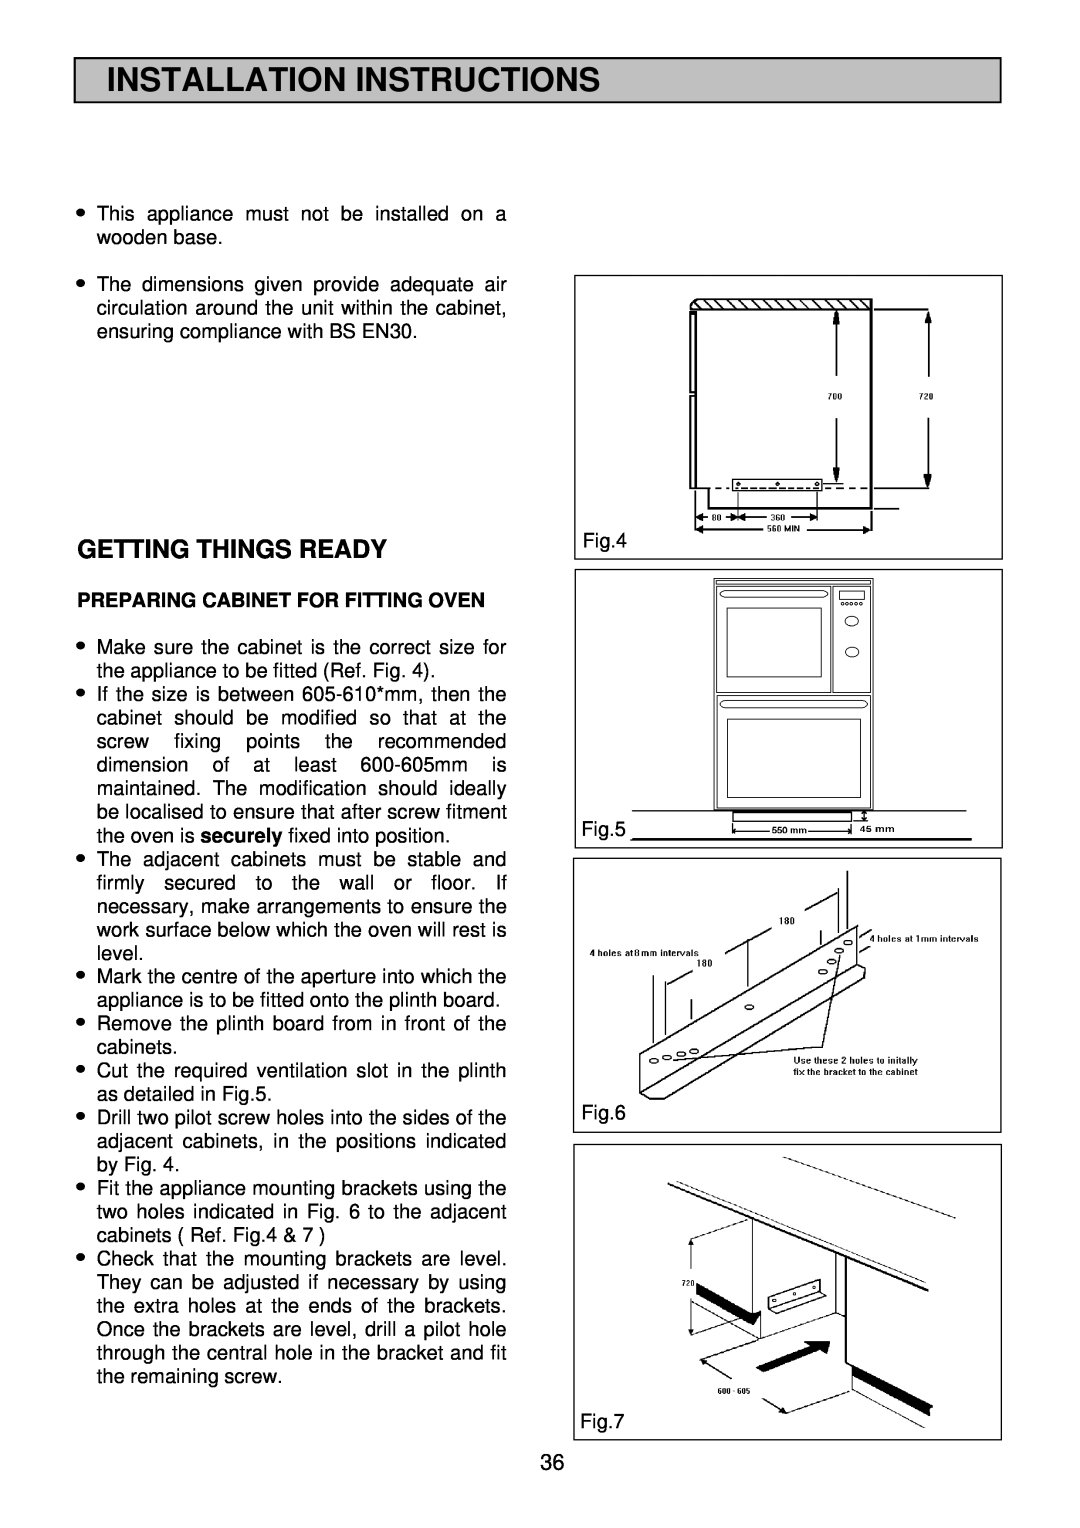 Electrolux EDB 872 manual Getting Things Ready, Installation Instructions, Preparing Cabinet For Fitting Oven 